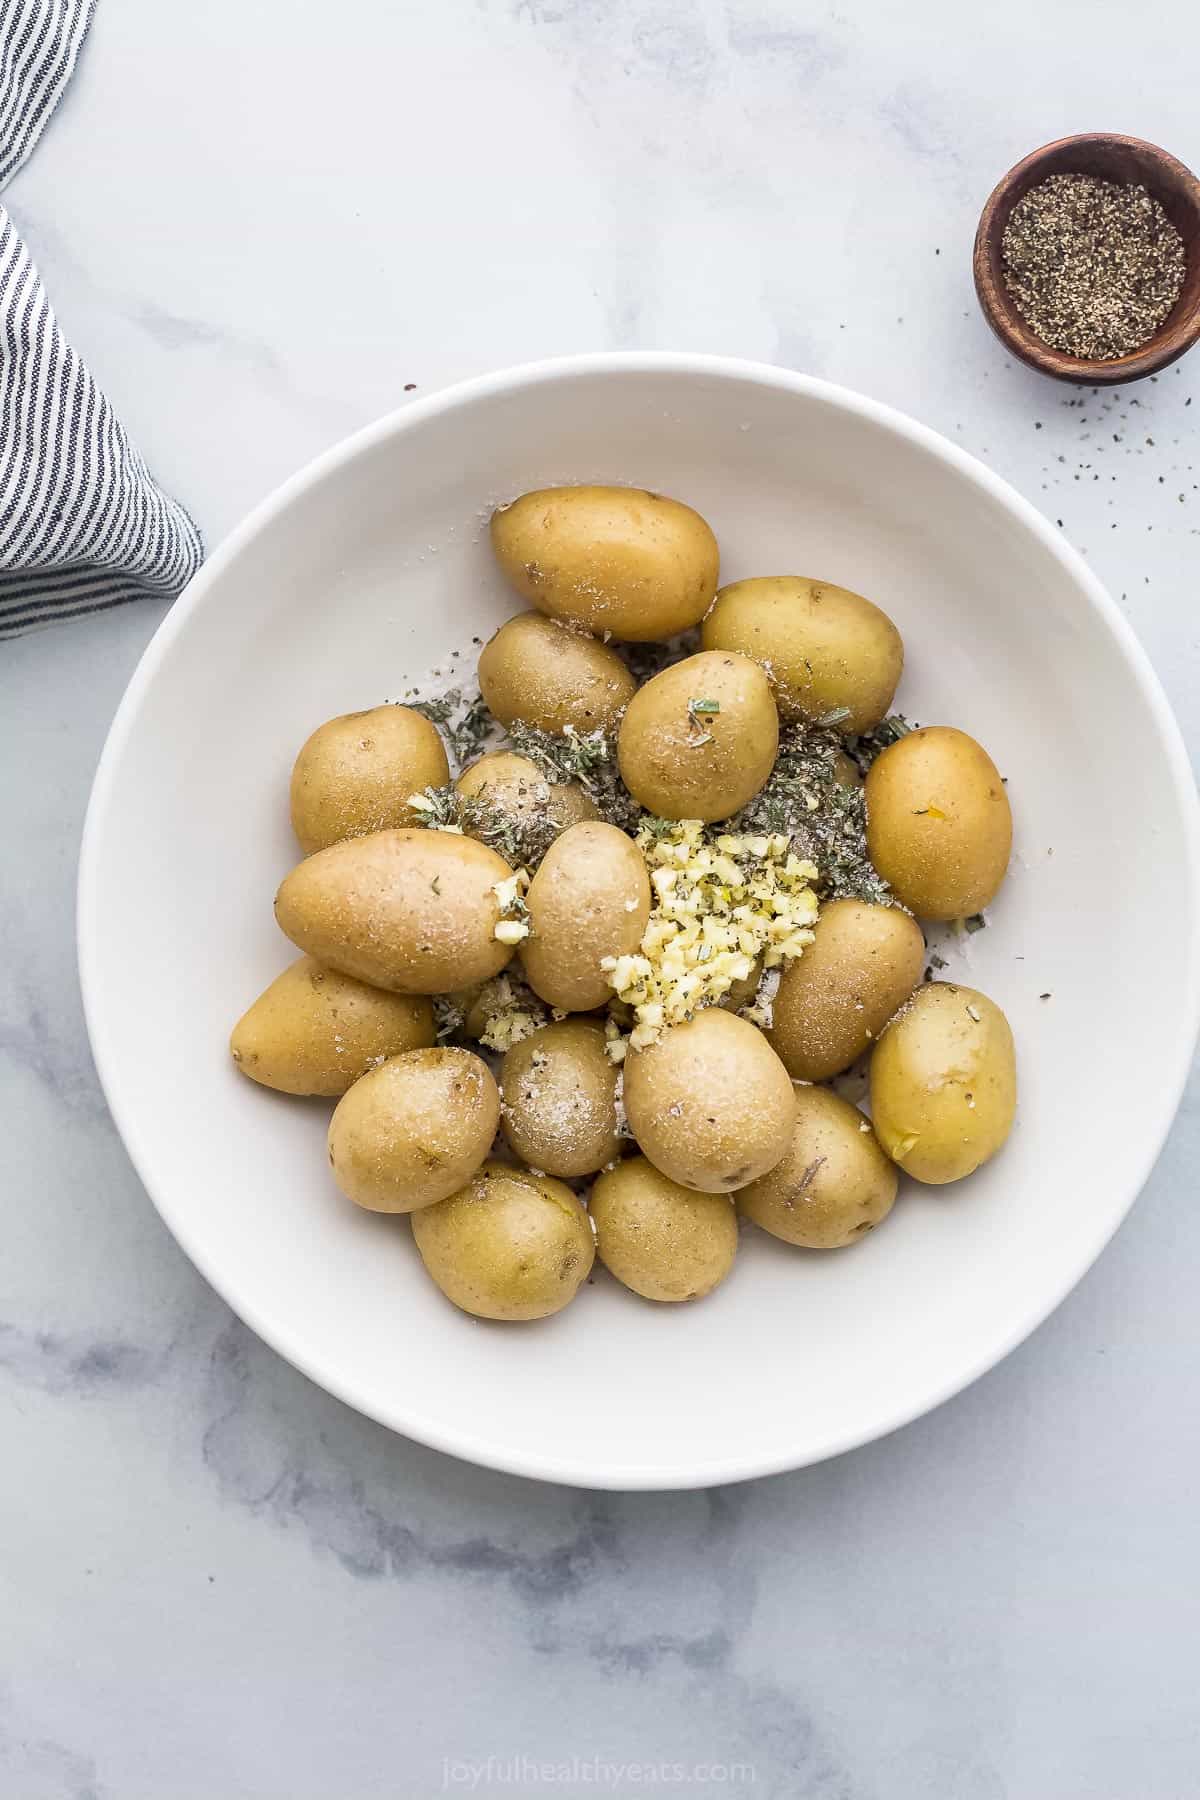 Mini yellow potatoes in a bowl with the seasonings beside a dish of salt and pepper